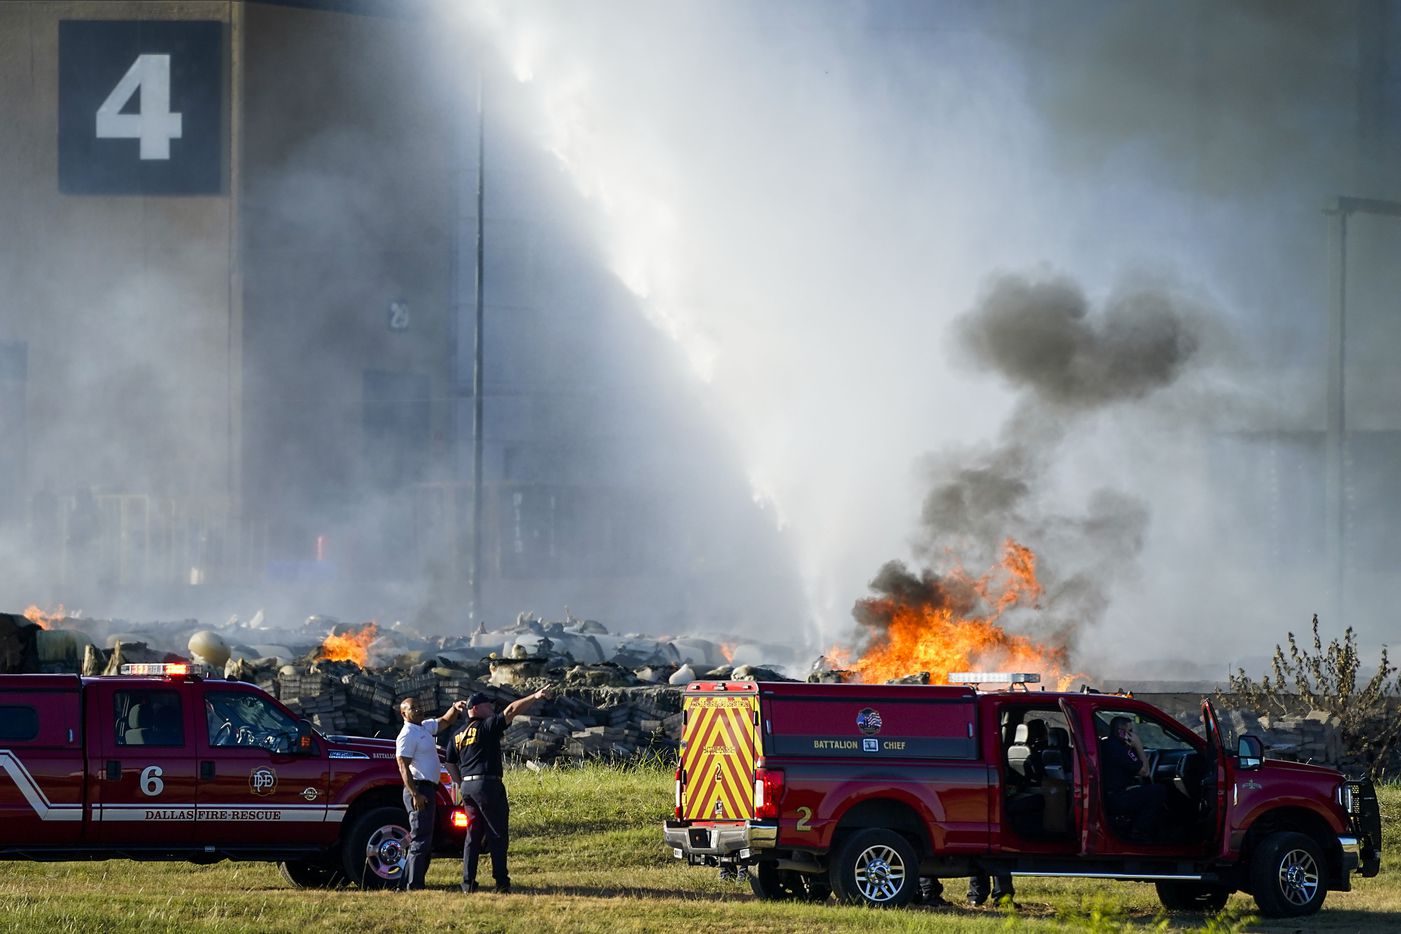 Fire crews battle a massive blaze in an industrial area of Grand Prairie on Wednesday morning, Aug. 19, 2020.